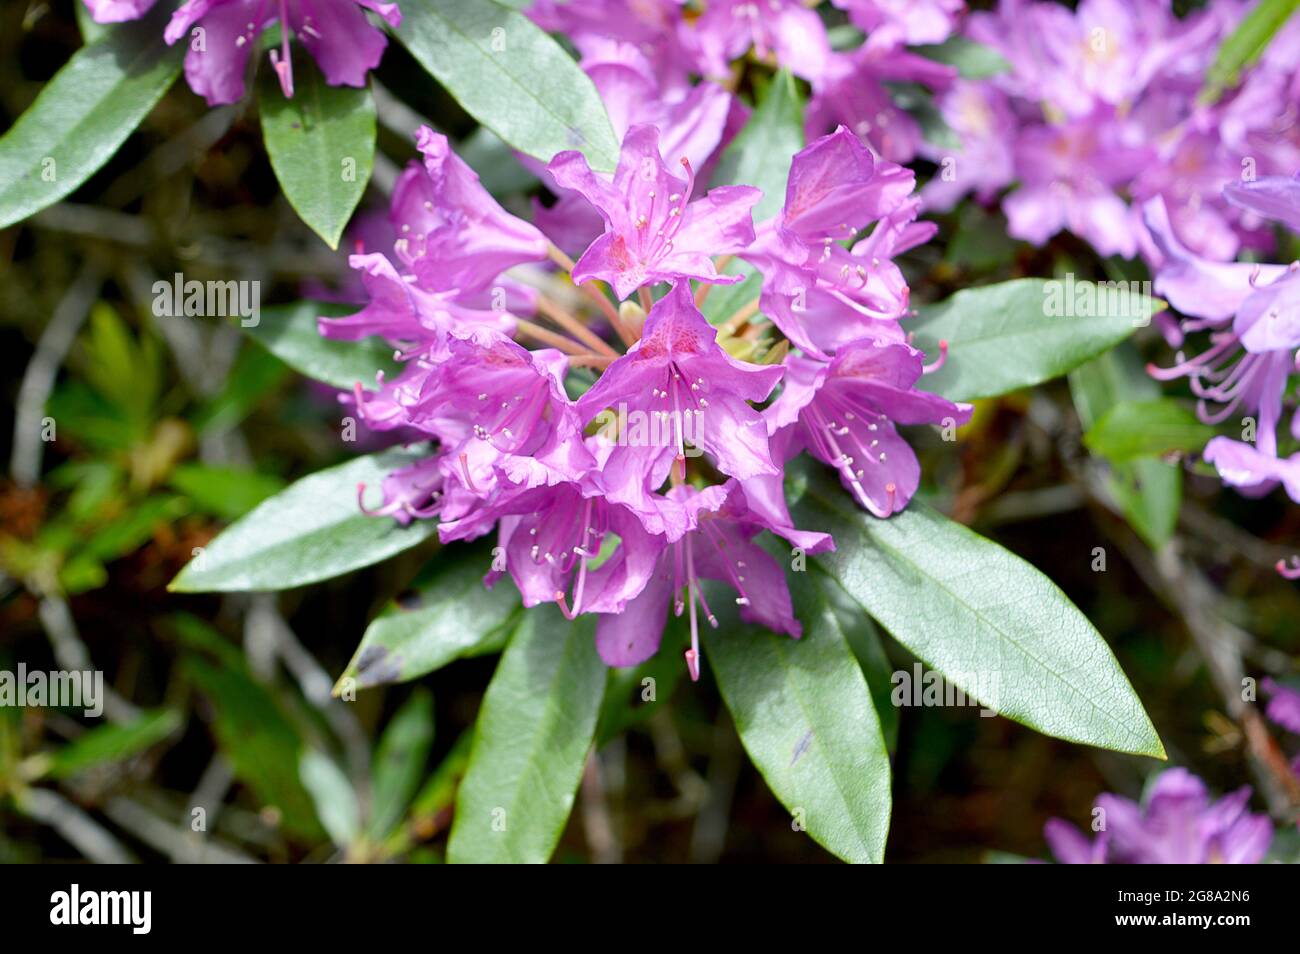 Despite its beautiful pink to purple flowers, this rhodendron (Rhododendron ponticum) is regarded as Scotland's most invasive non-native plant. Stock Photo